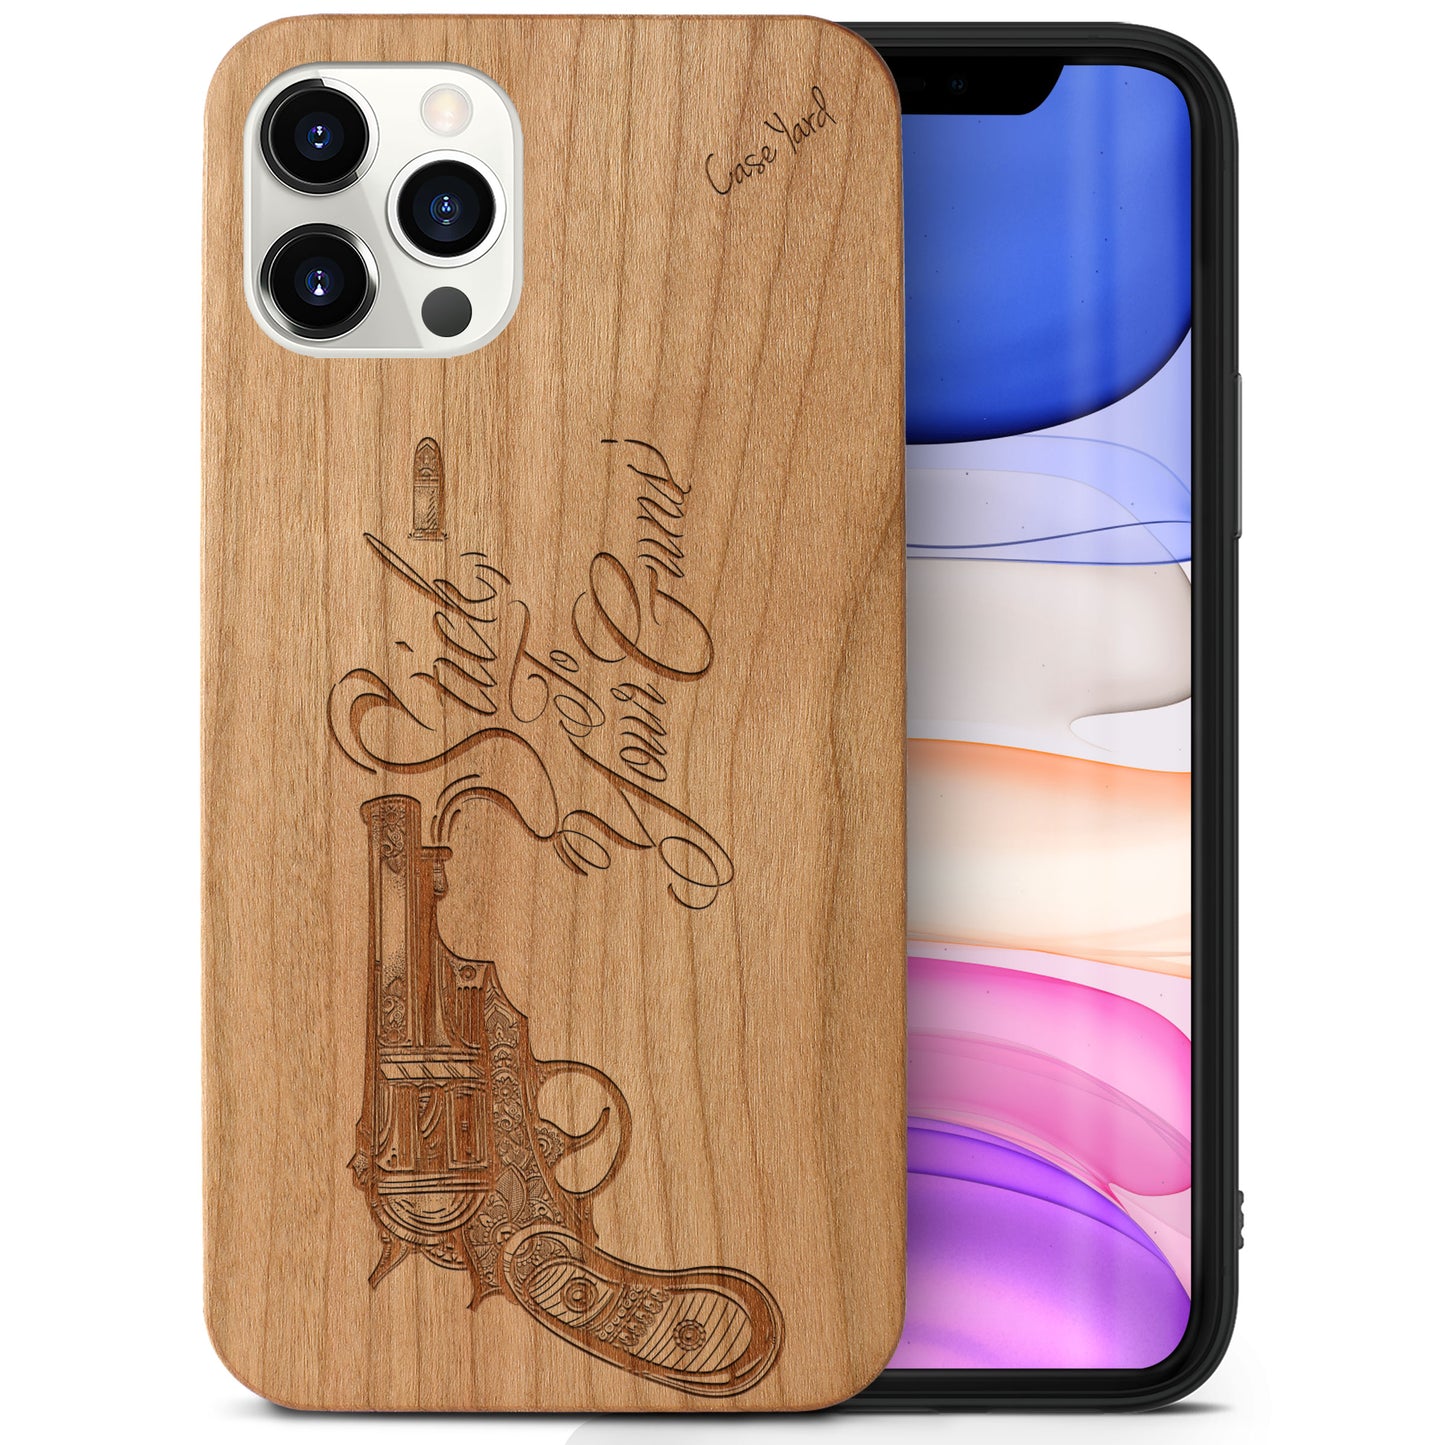 Wooden Cell Phone Case Cover, Laser Engraved case for iPhone & Samsung phone Stick to Your Guns Design